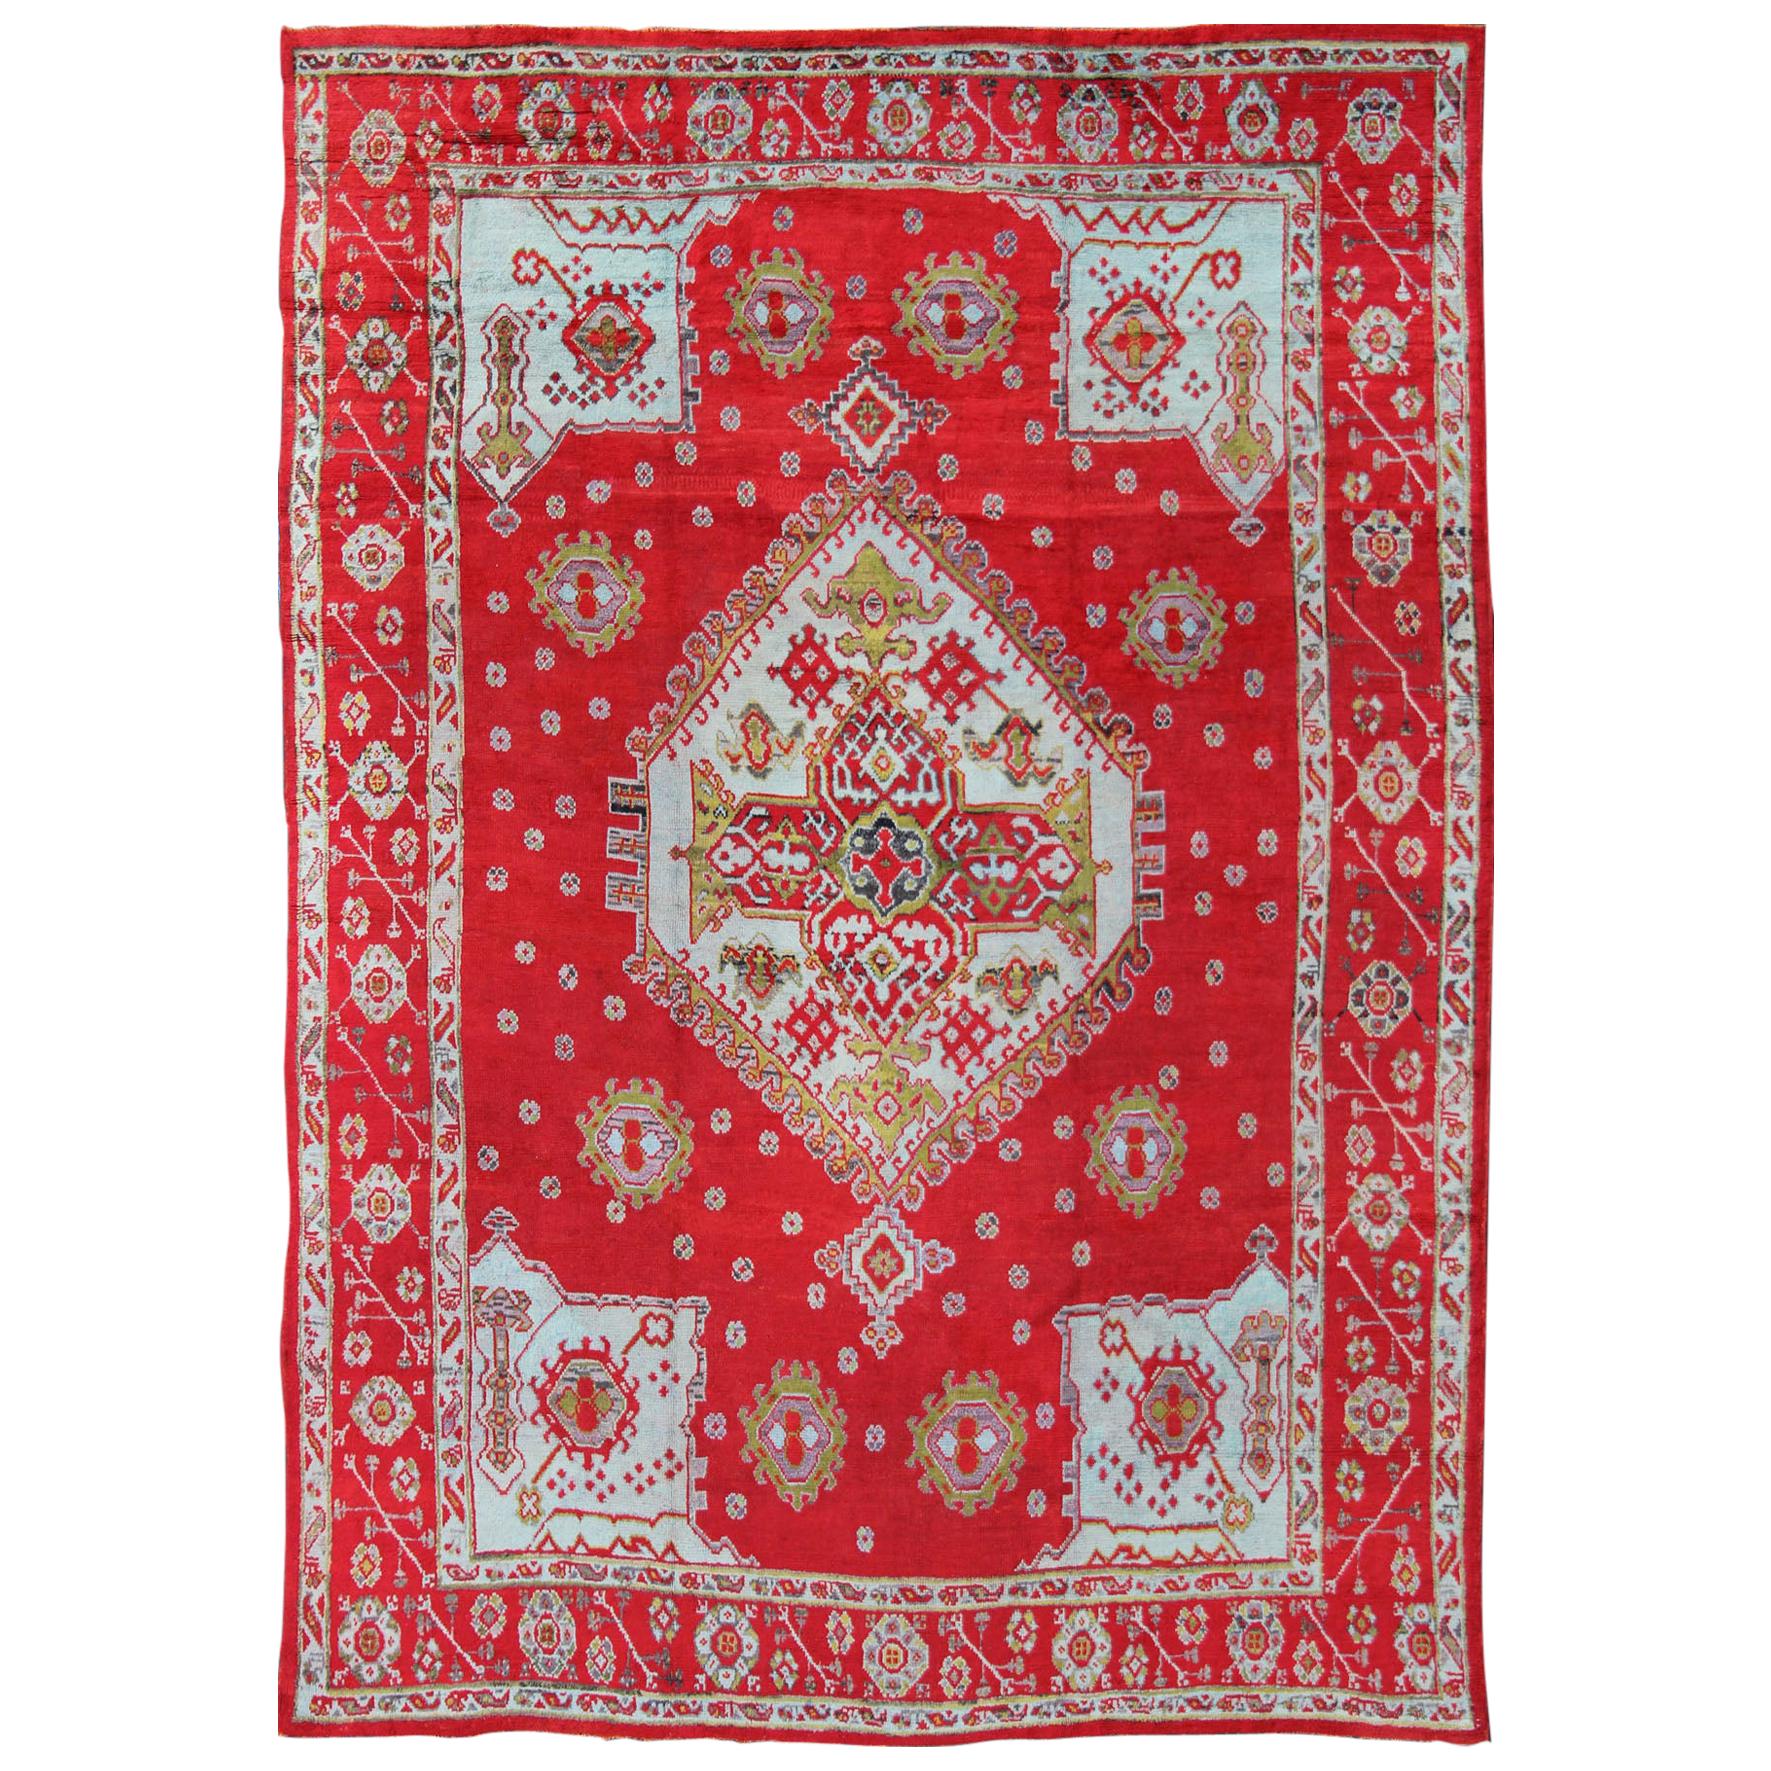 Antique Oushak Rug with Beautiful Red, Acid Green and Icy Blue